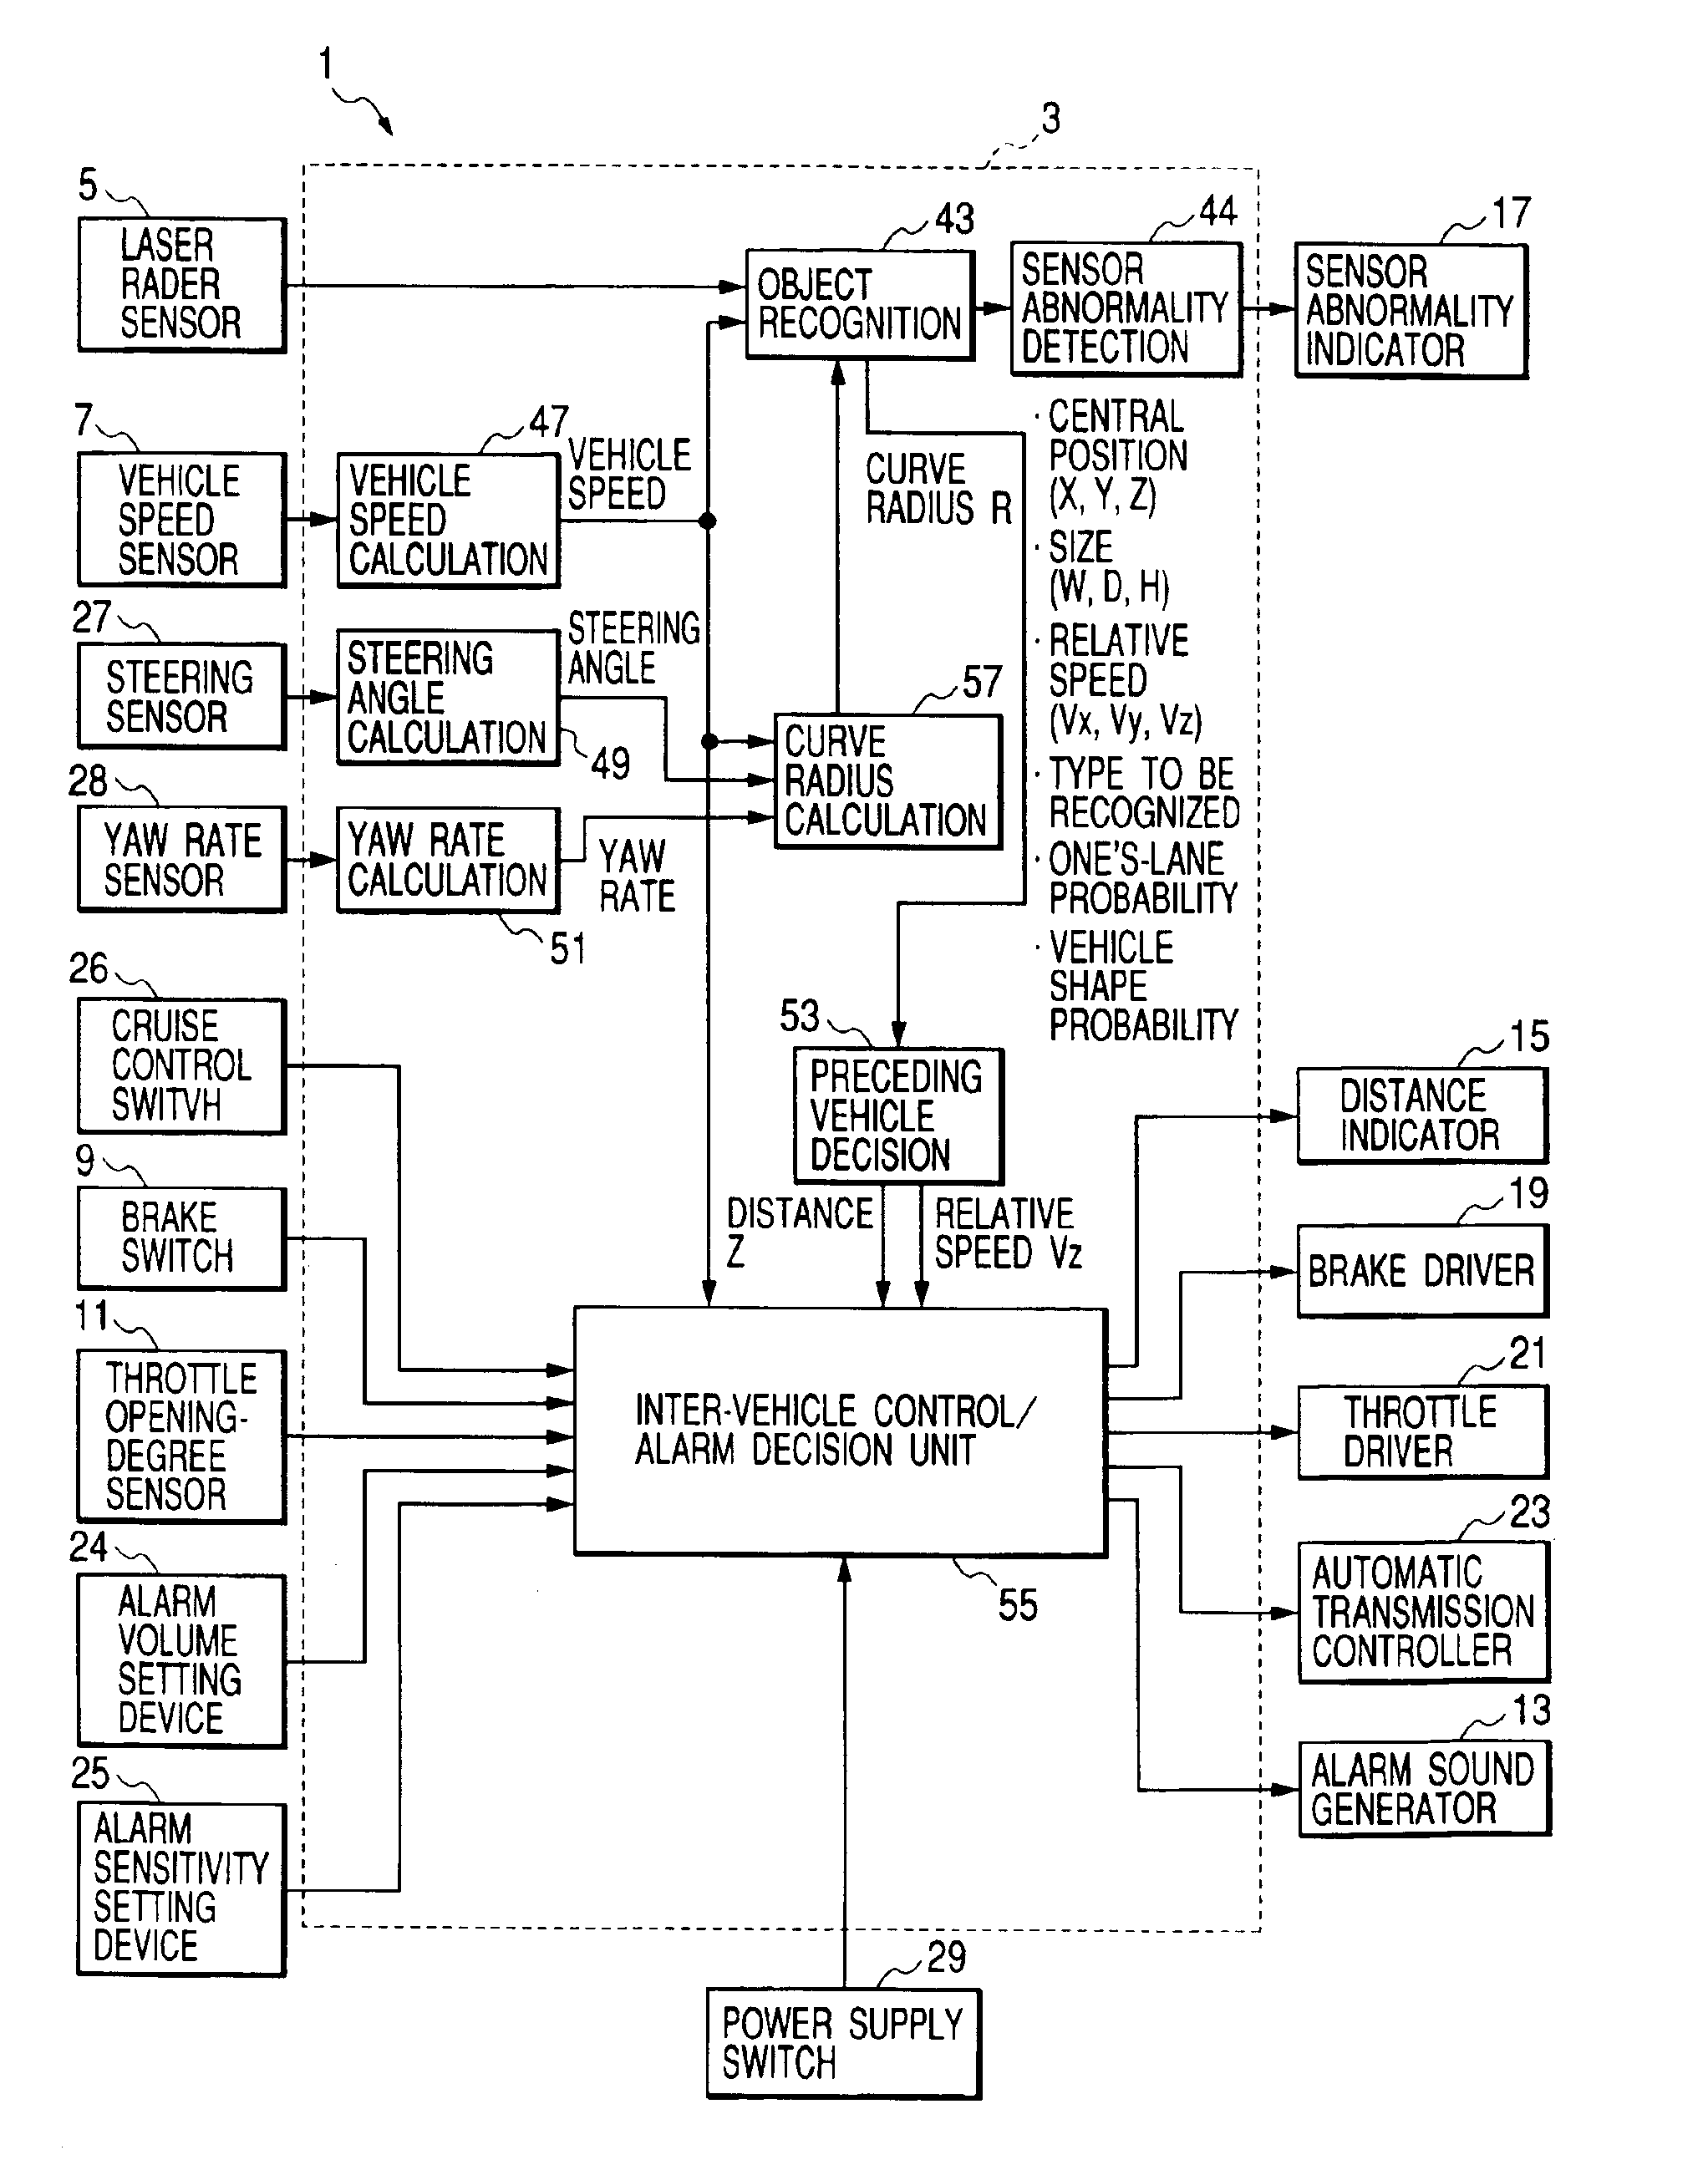 Object recognition apparatus for vehicle, and inter-vehicle distance control unit